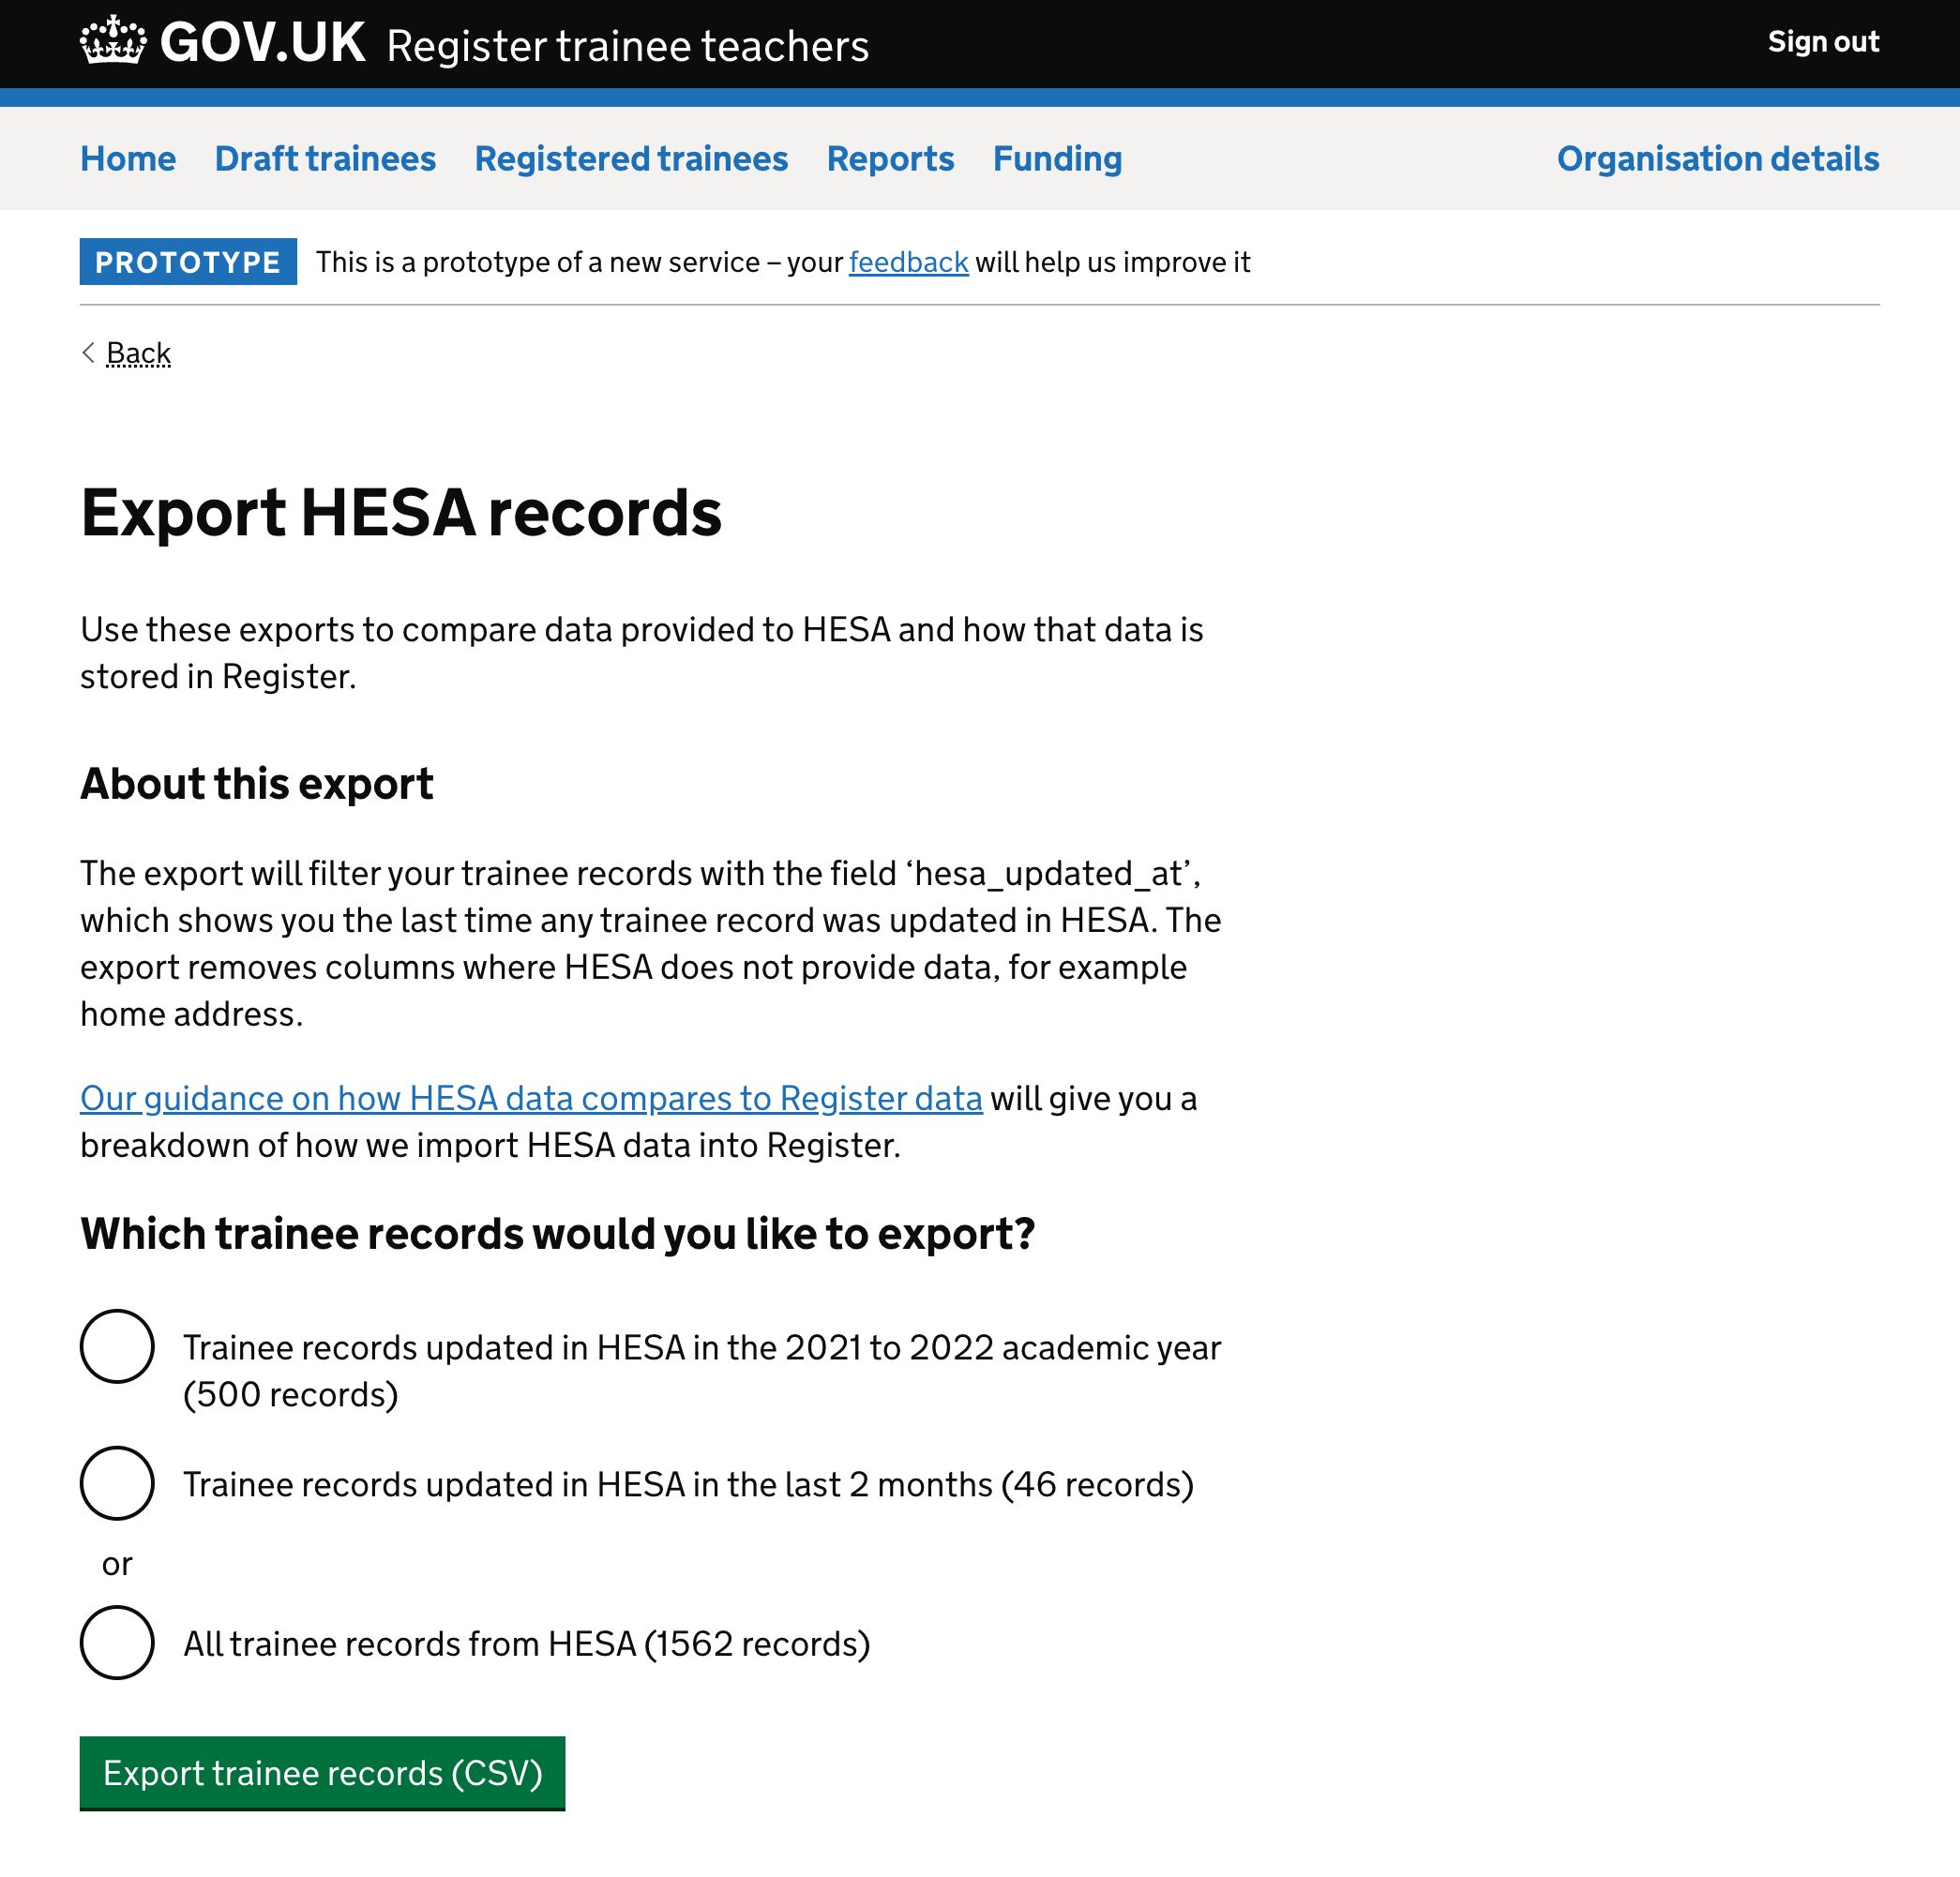 A page to download recent HESA data as a report.